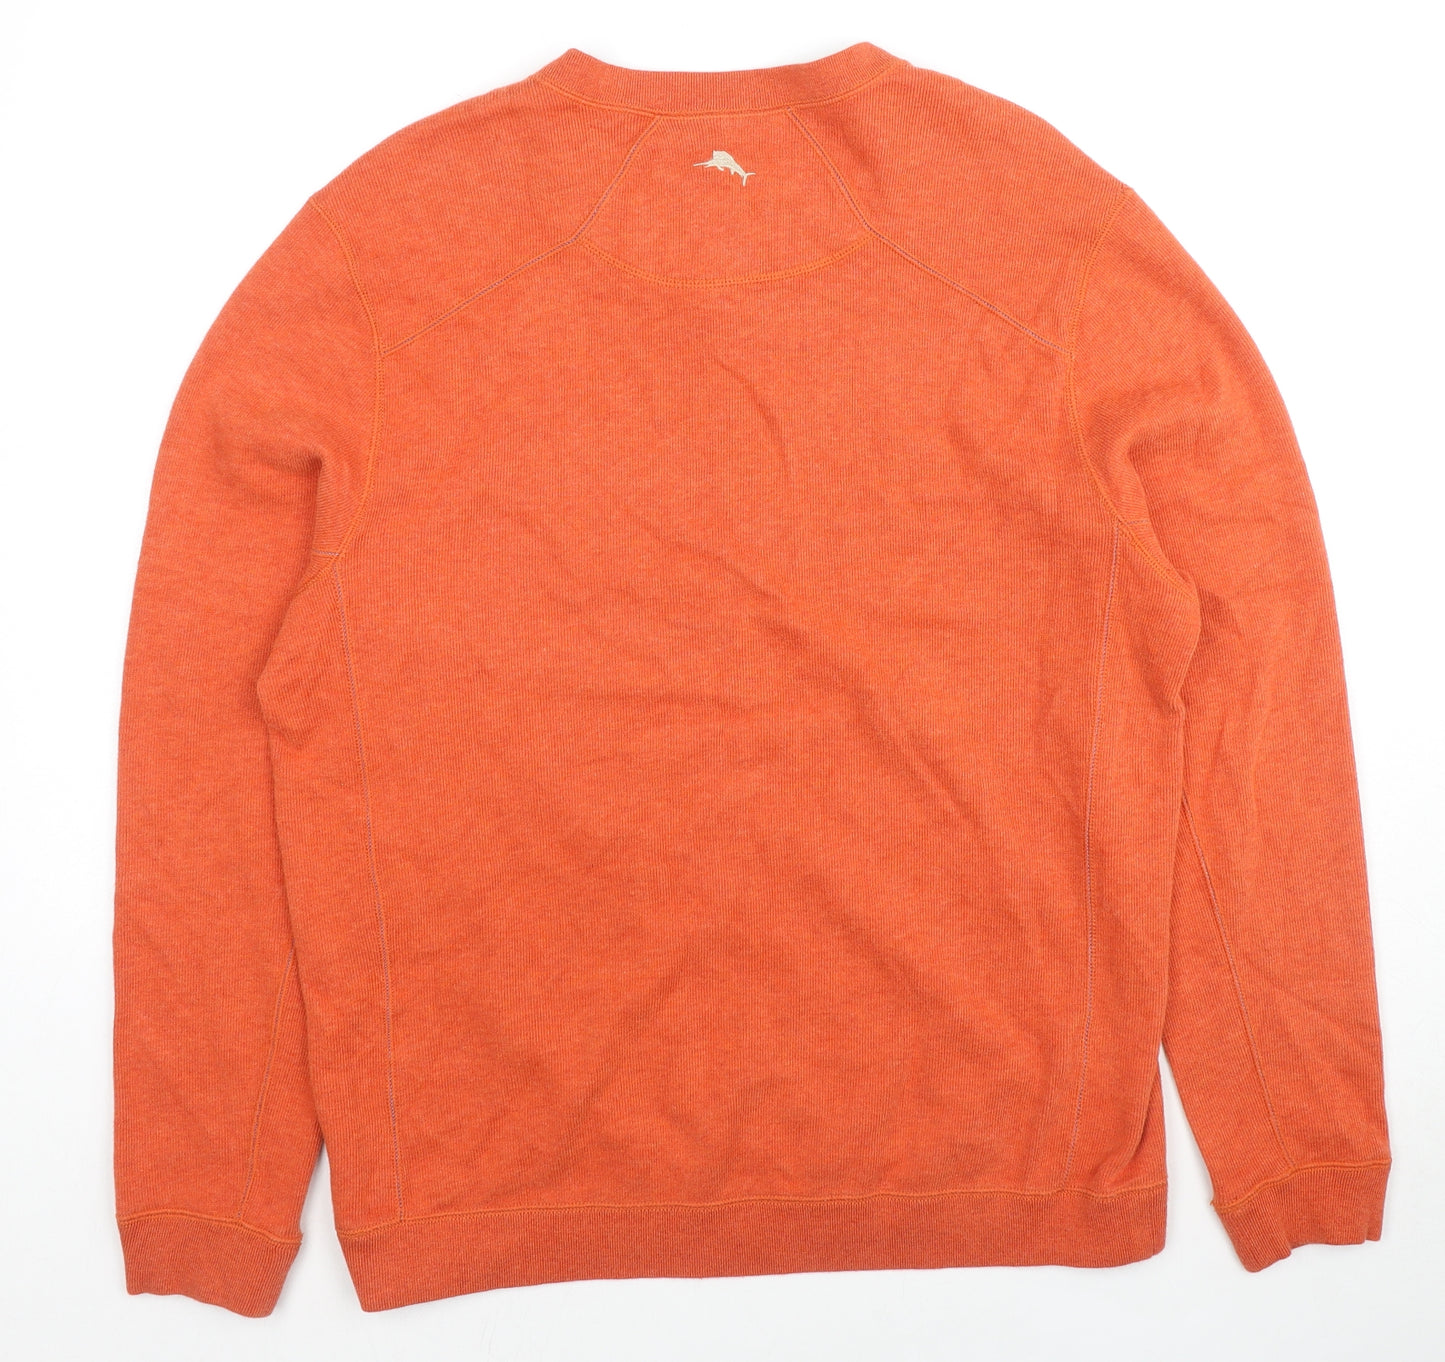 Tommy Bahama Mens Orange Cotton Pullover Sweatshirt Size S - Embroidered Detail, Fish